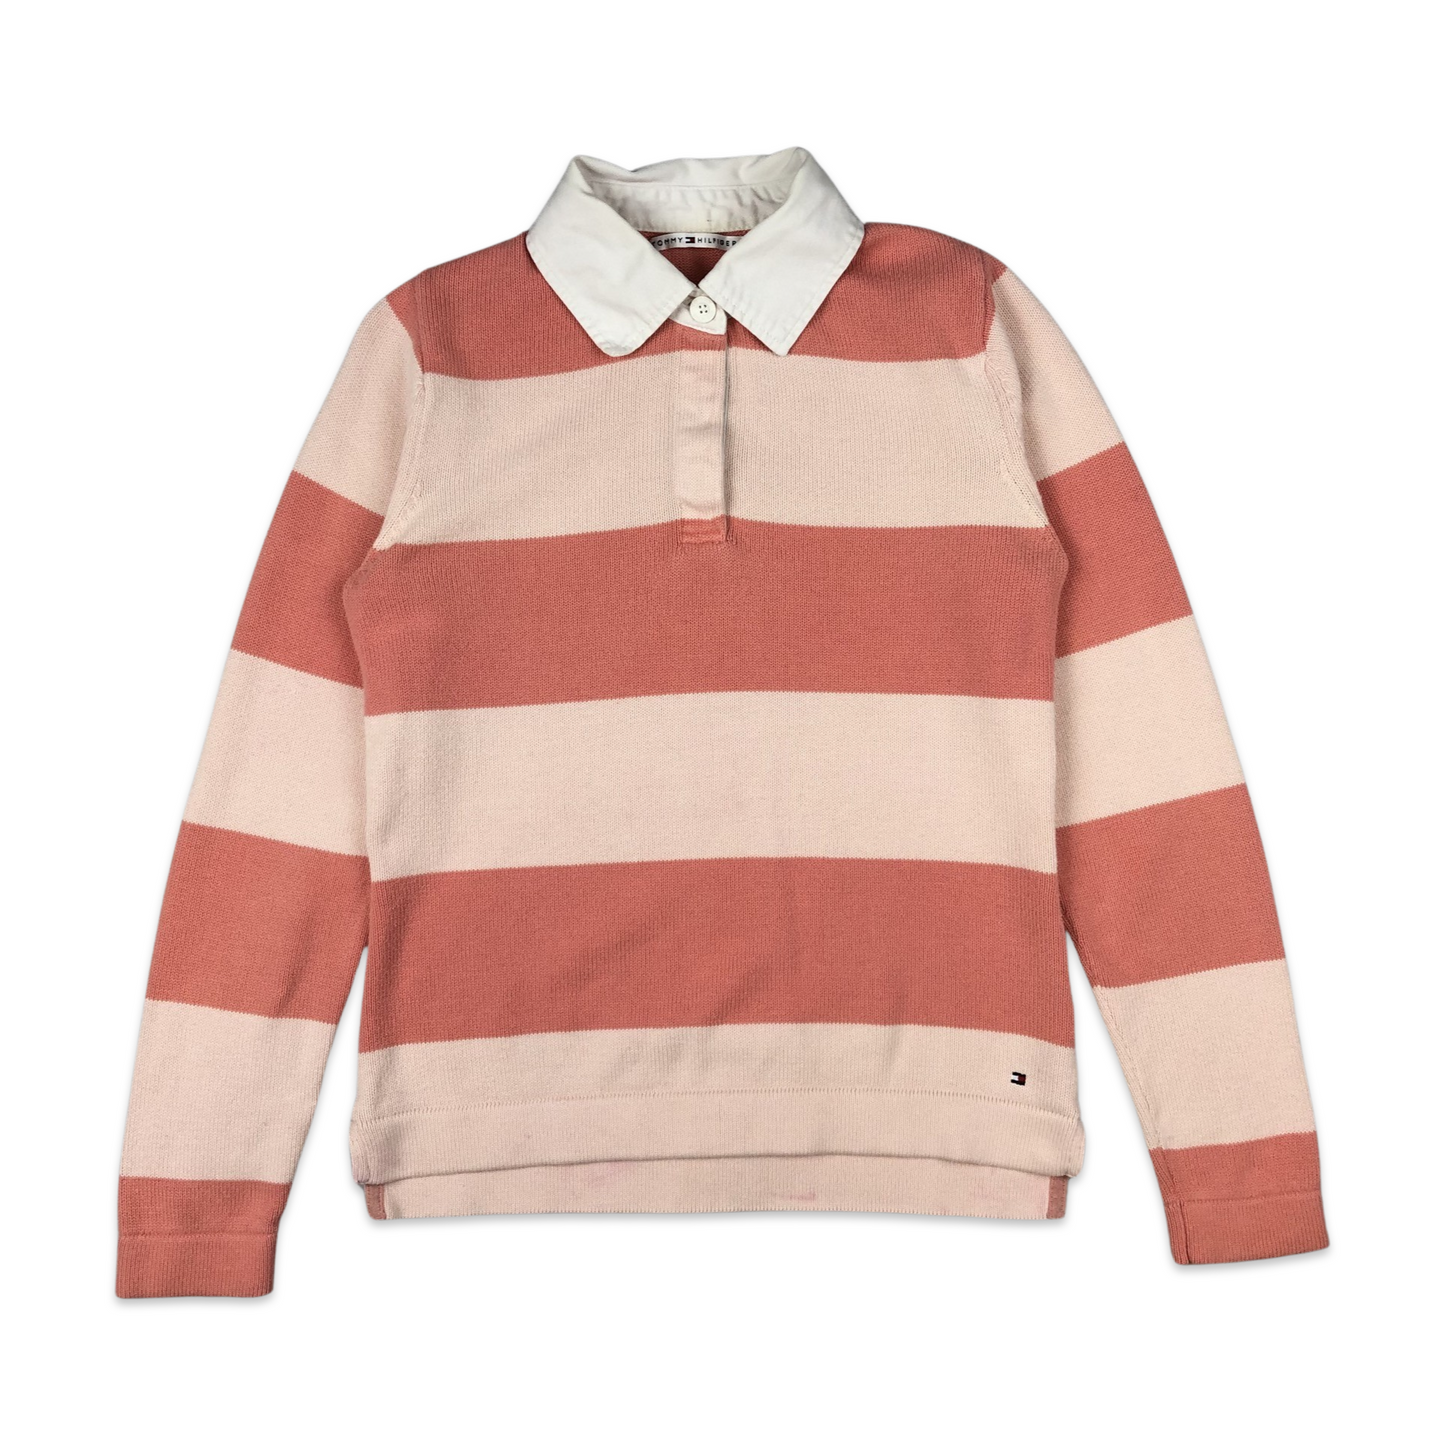 Tommy Hilfiger Rugby Shirt Pink Long Sleeve Striped Spell Out 10 12